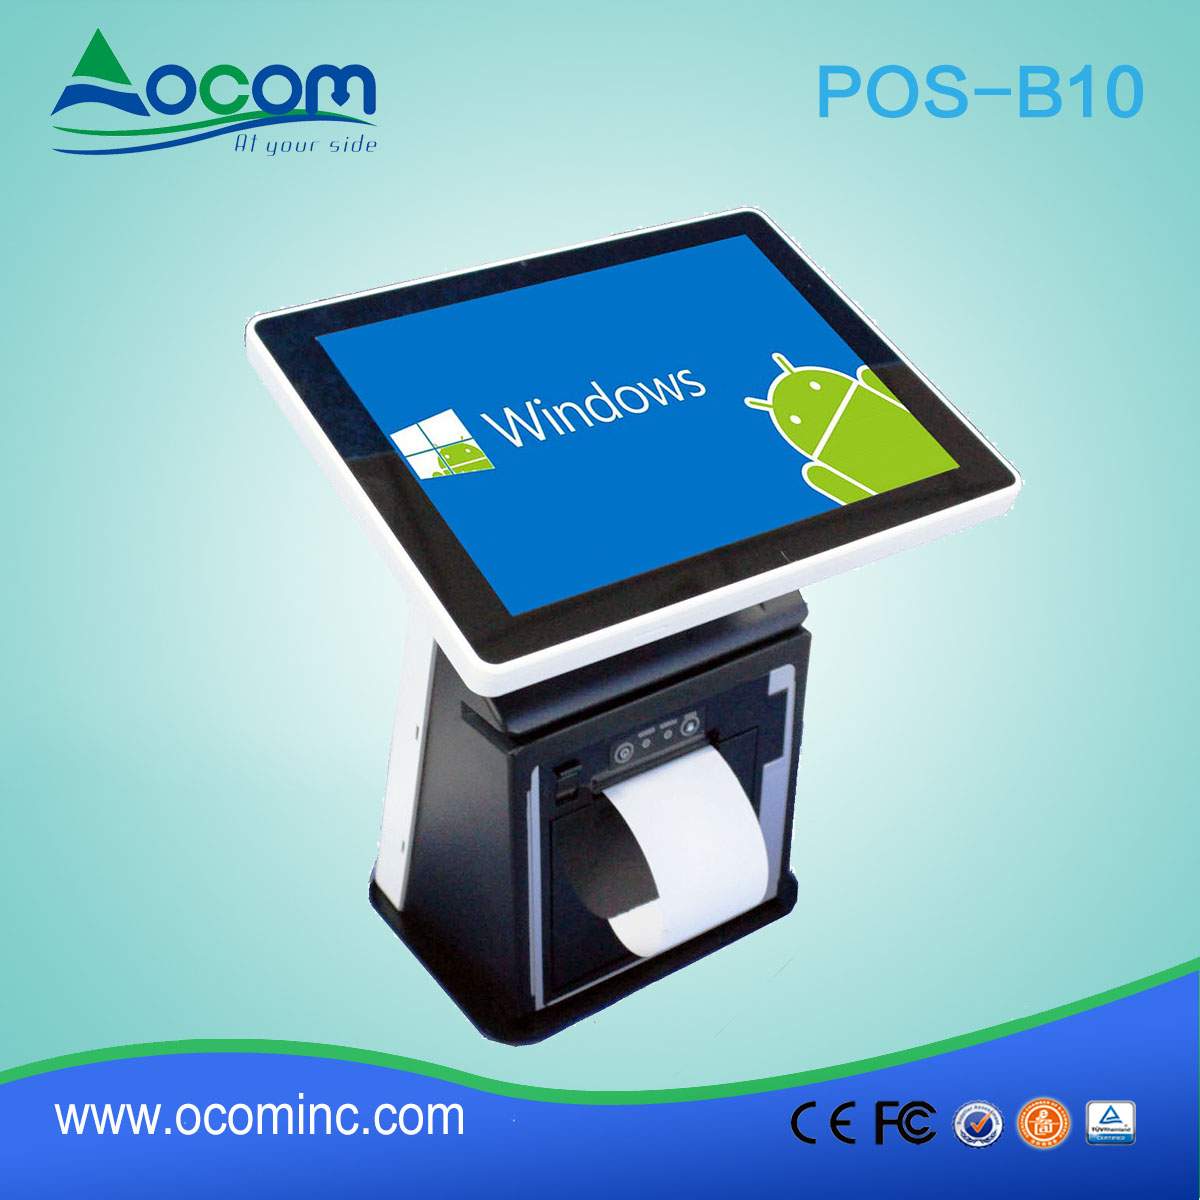 10" touch dual screen all in one pos manufacturer with optional Android or Windows OS